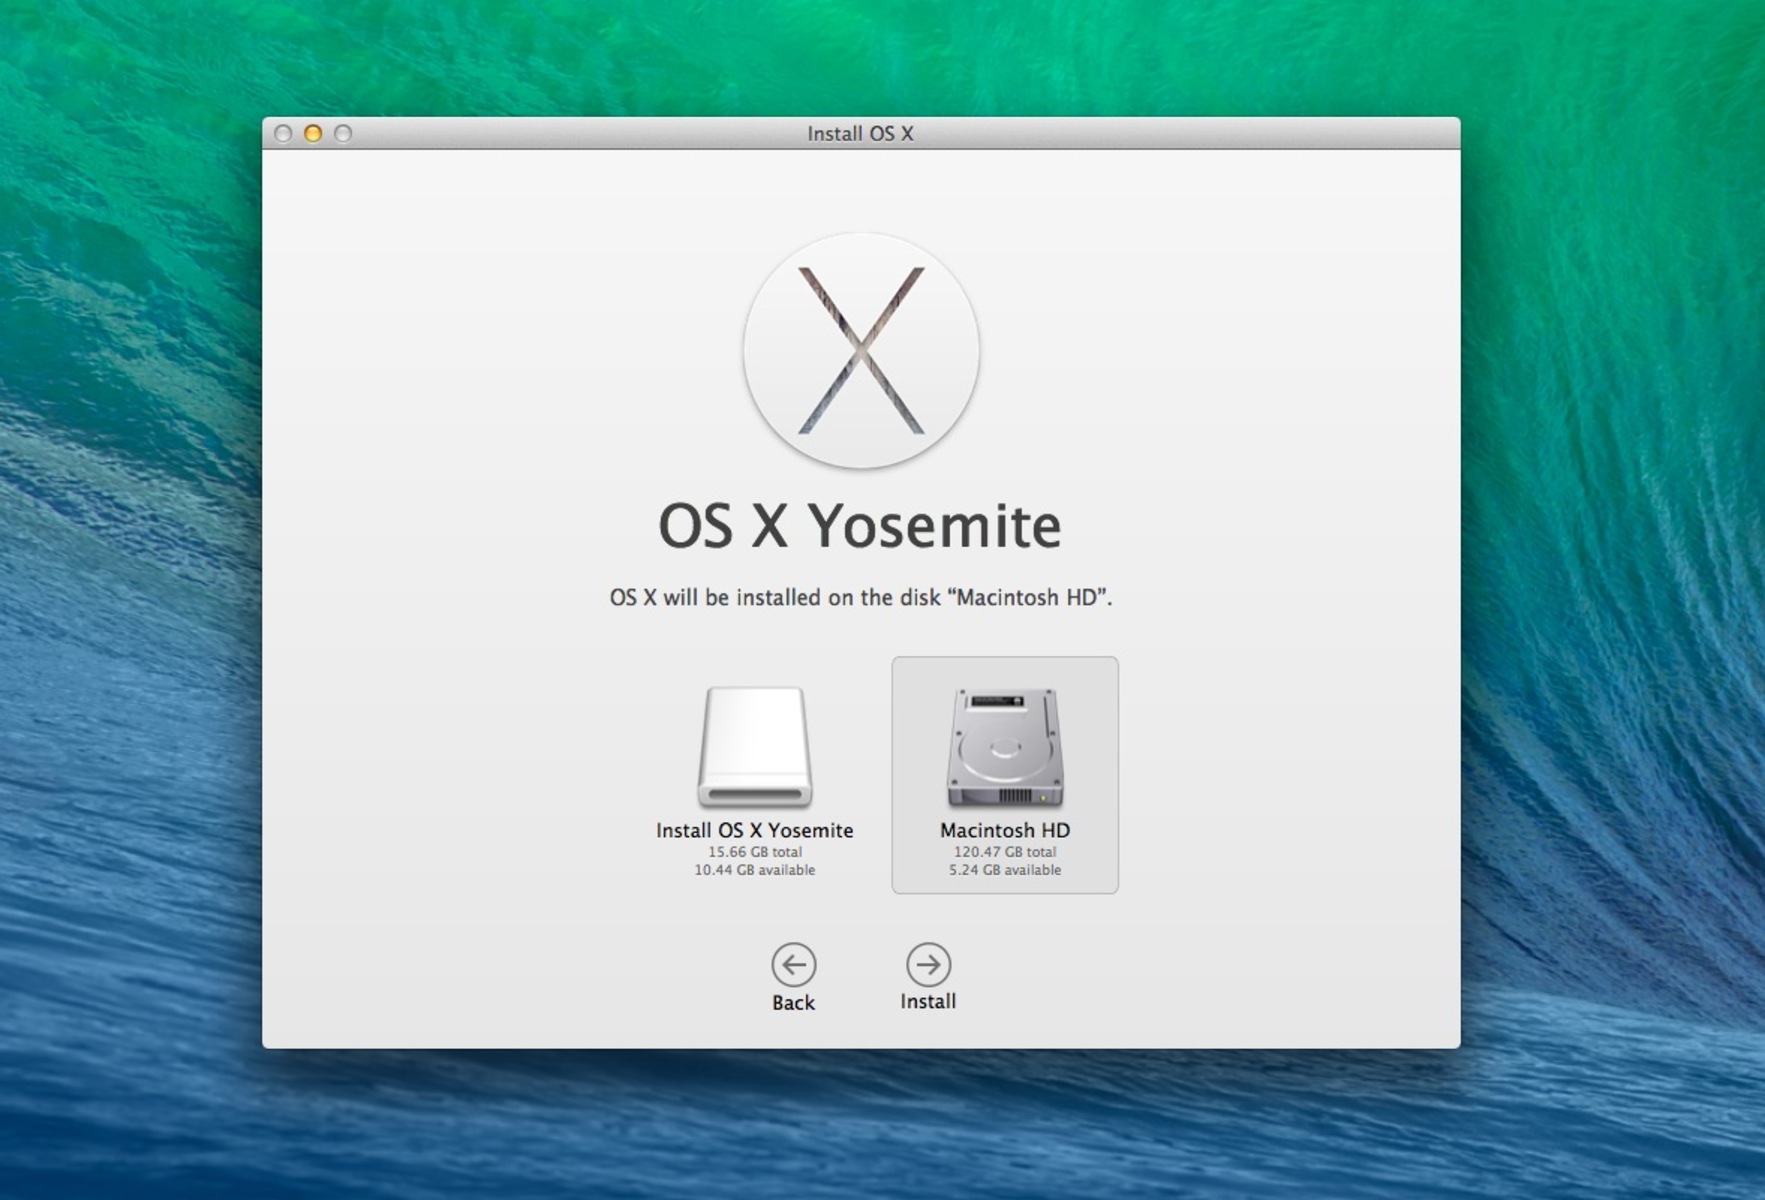 perform-a-clean-install-of-os-x-yosemite-on-your-mac